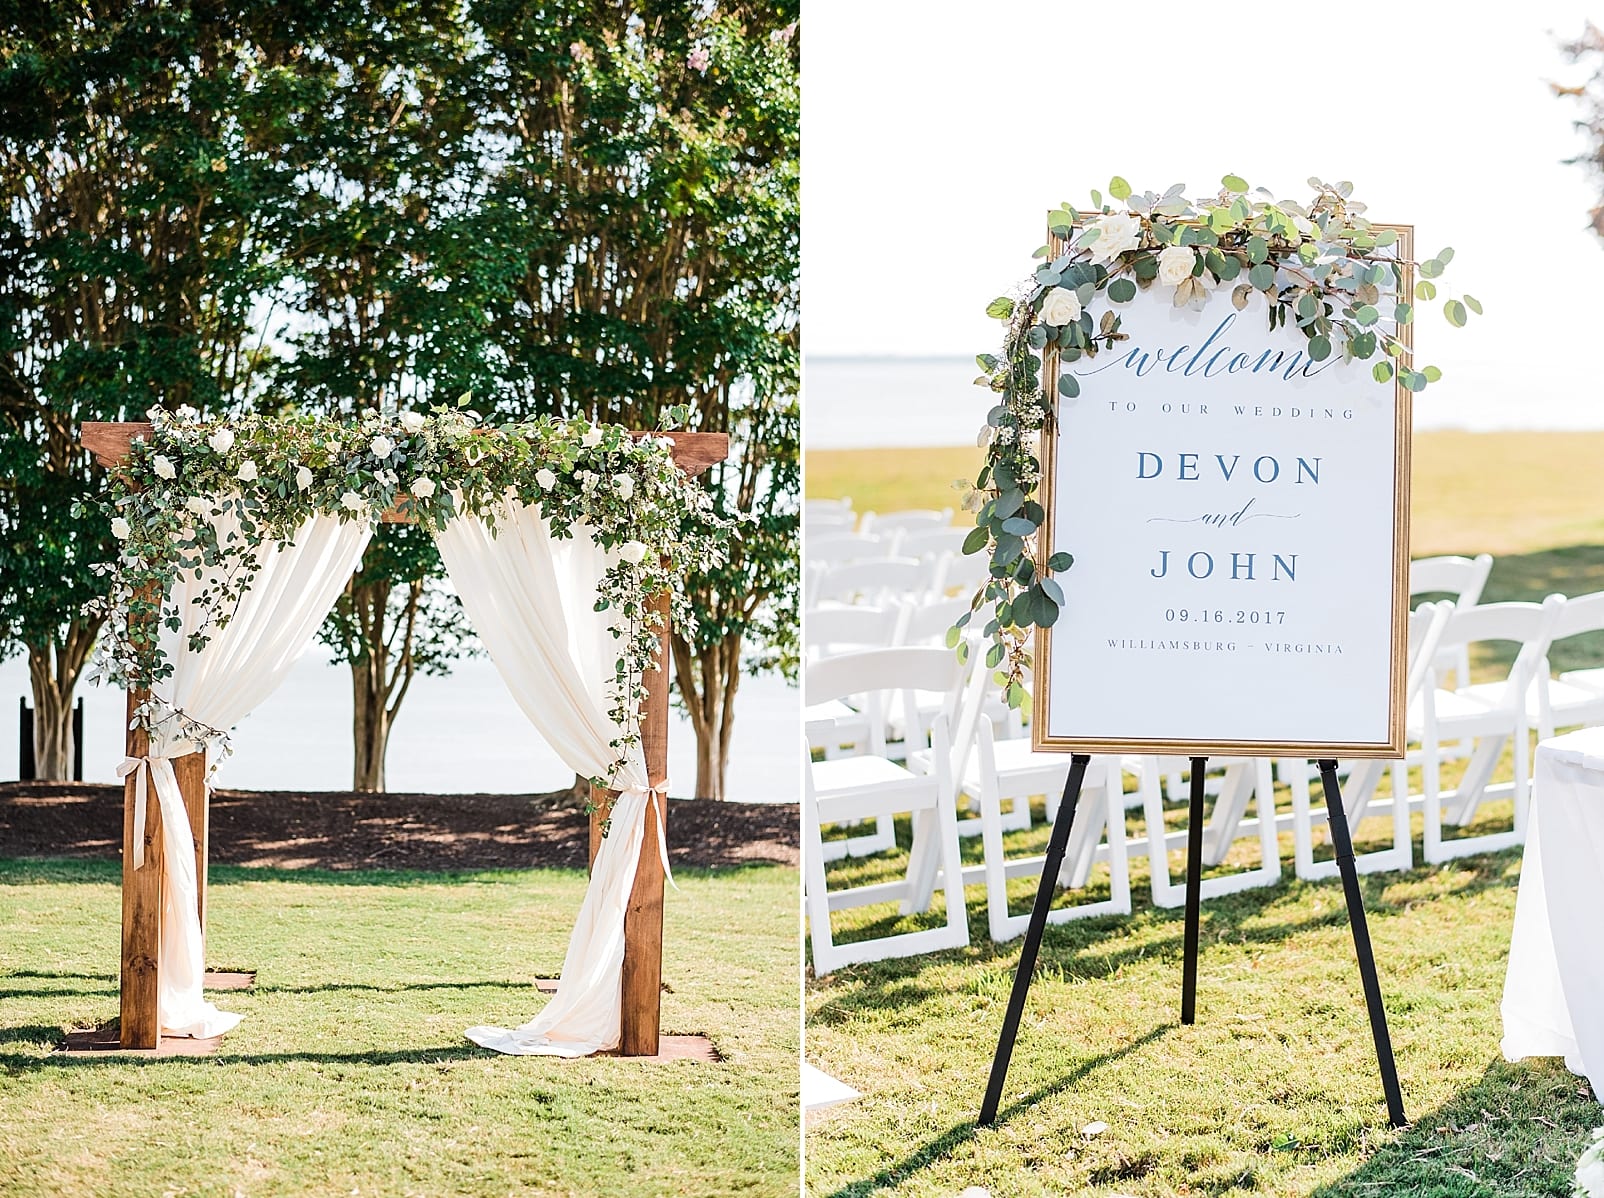 kingsmill resort wedding ceremony welcome sign inspiration ceremony site photo